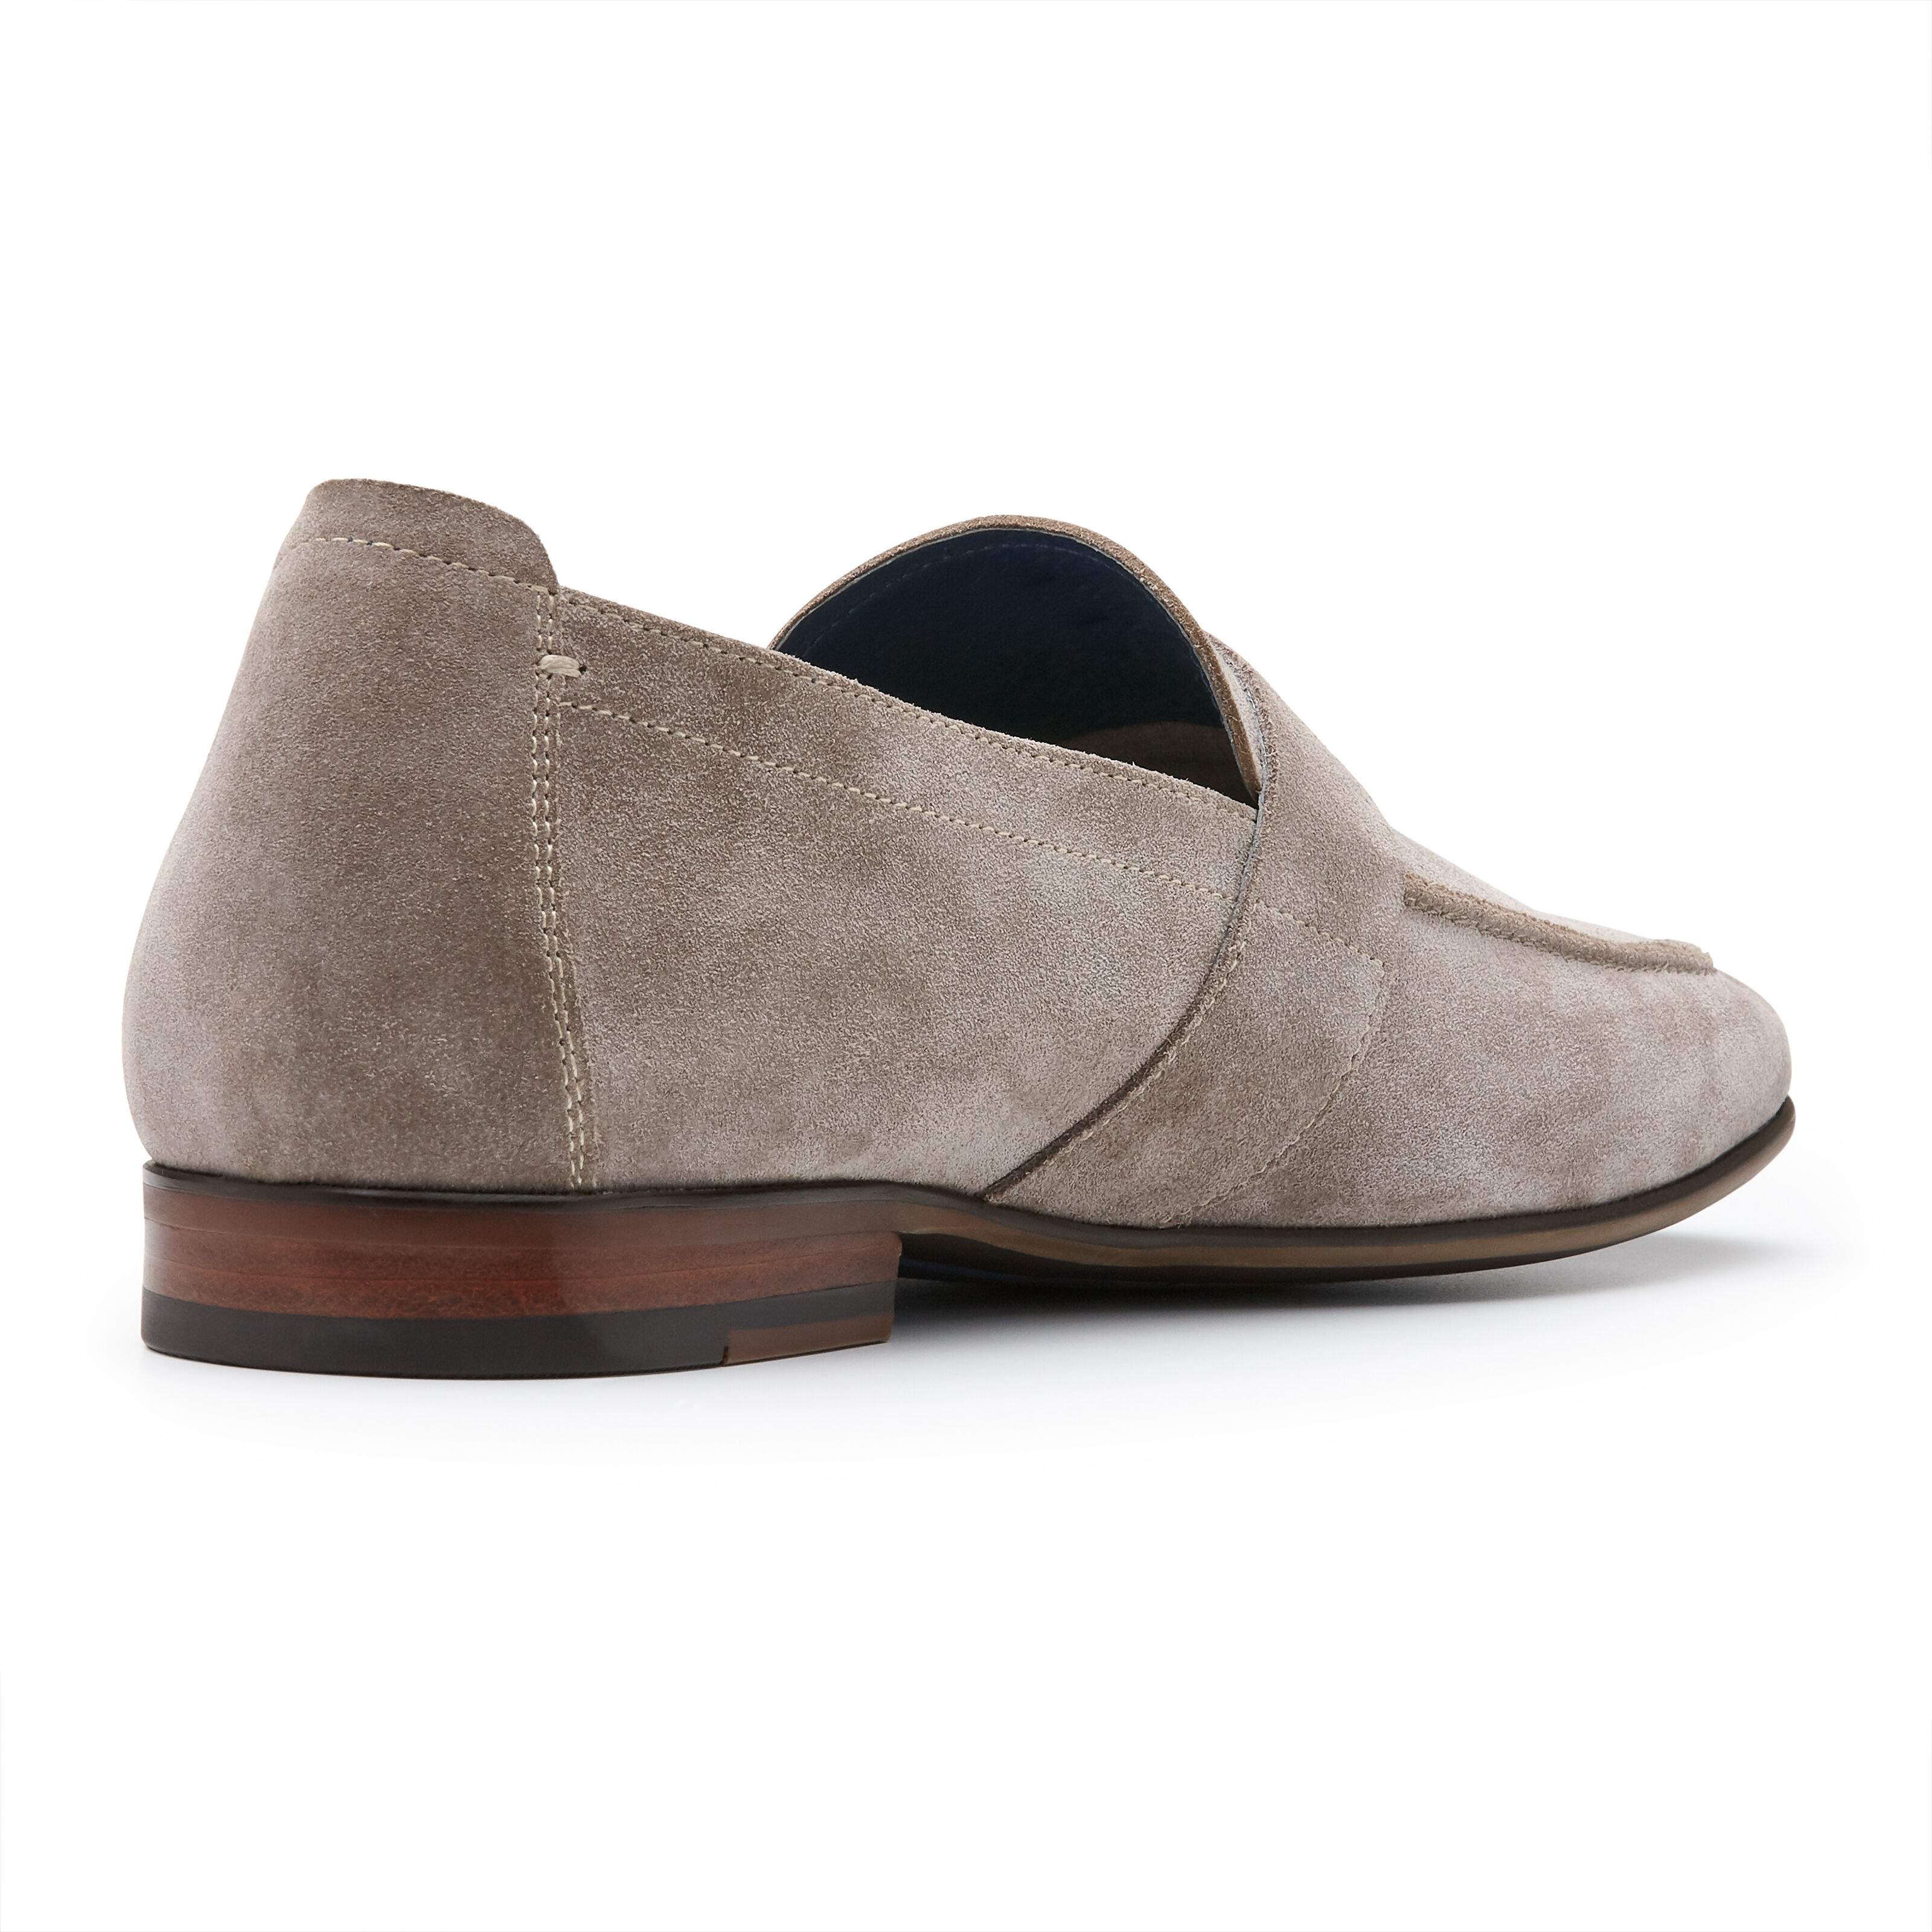 grey suede slip on shoes